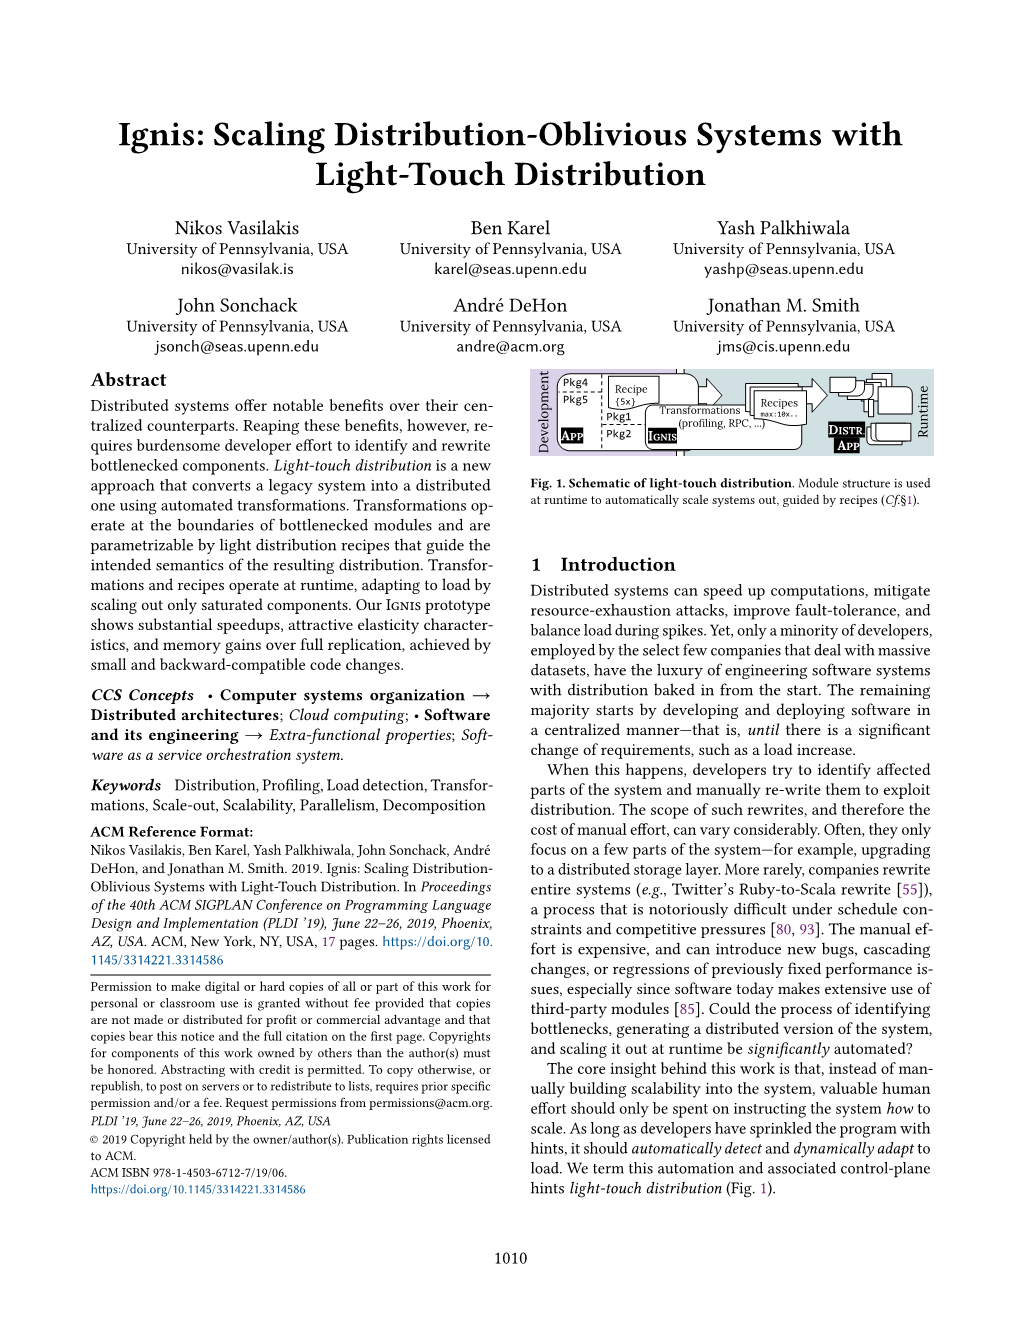 Ignis: Scaling Distribution-Oblivious Systems with Light-Touch Distribution